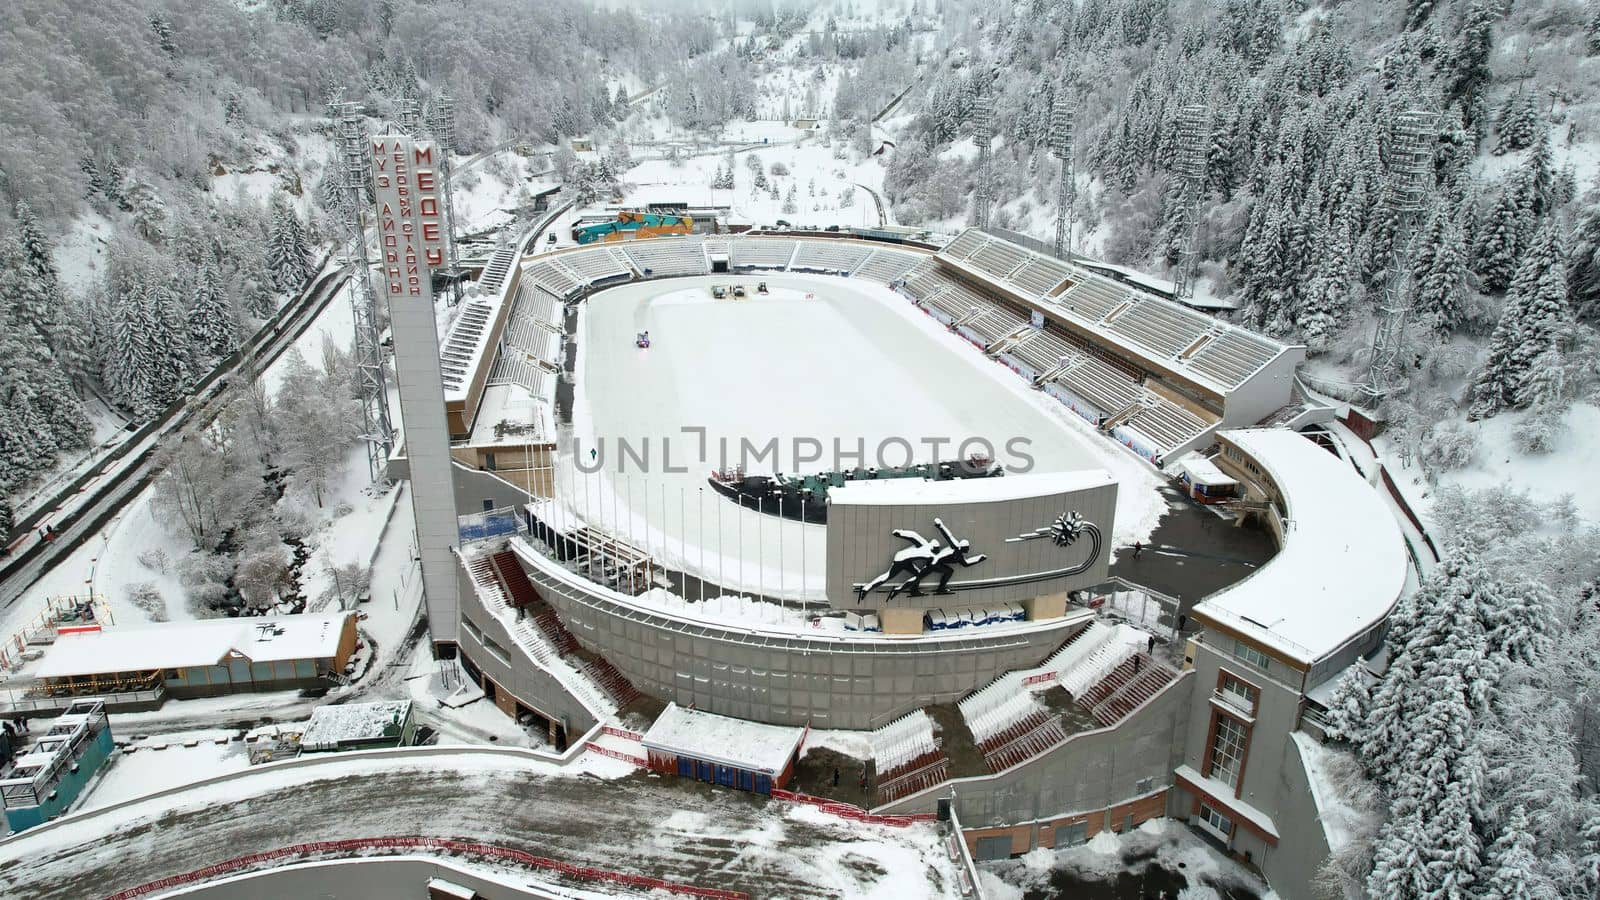 Winter alpine skating rink Medeo in the mountains. Drone view of the snowy forest and mountains. White clouds and fog in the gorge. Snow removal is underway. A large stadium. Almaty, Kazakhstan